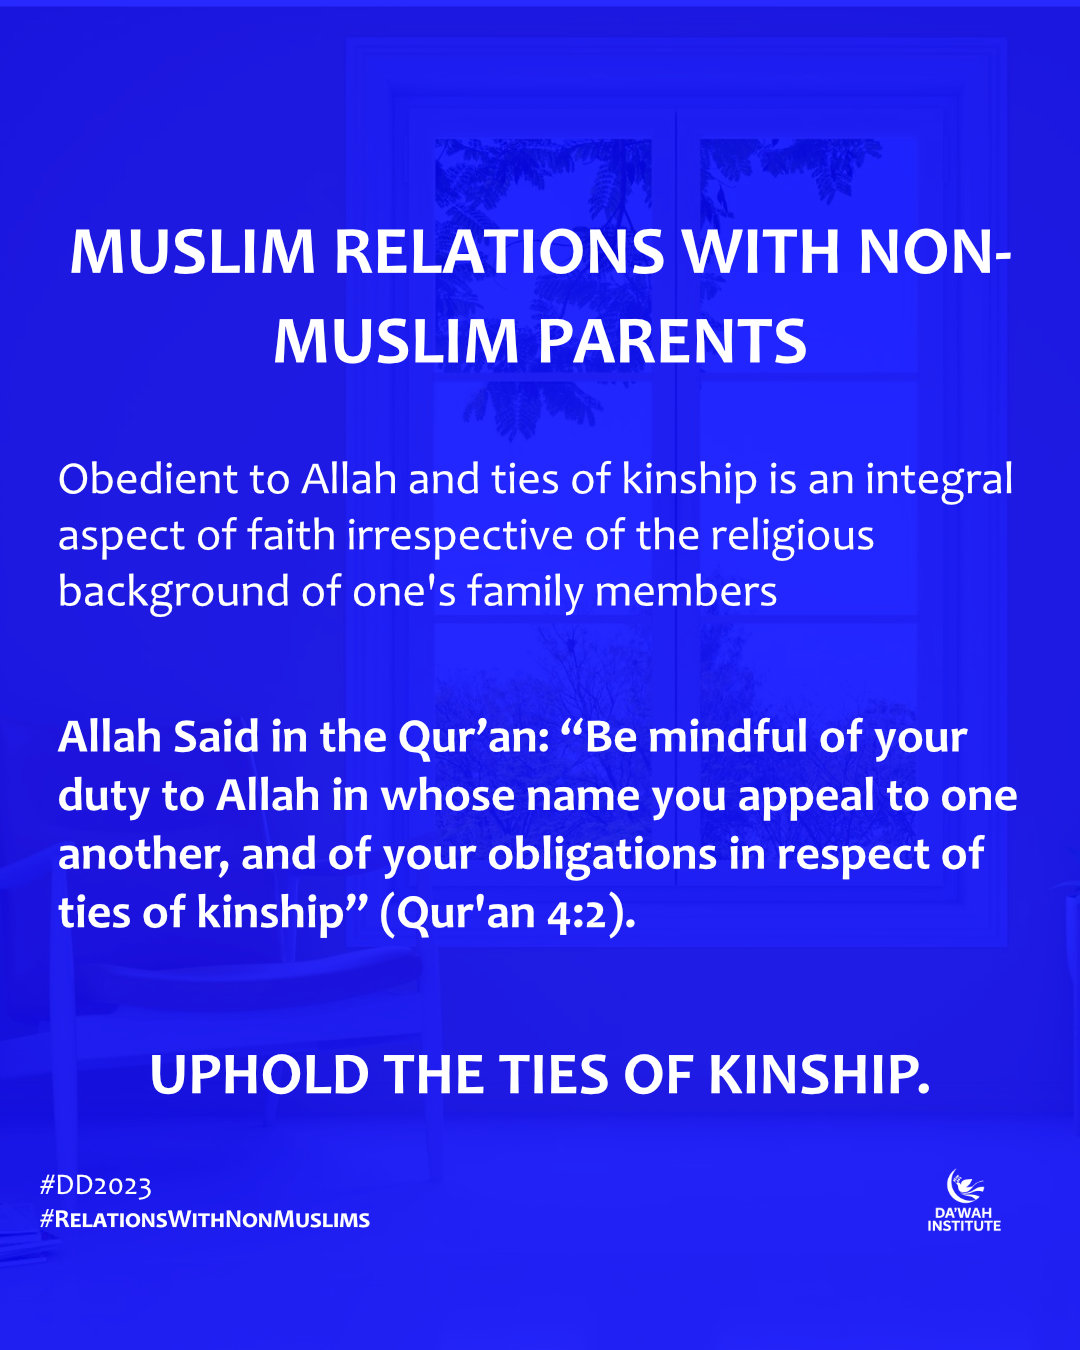 MUSLIM RELATIONS WITH NON-MUSLIM PARENTS